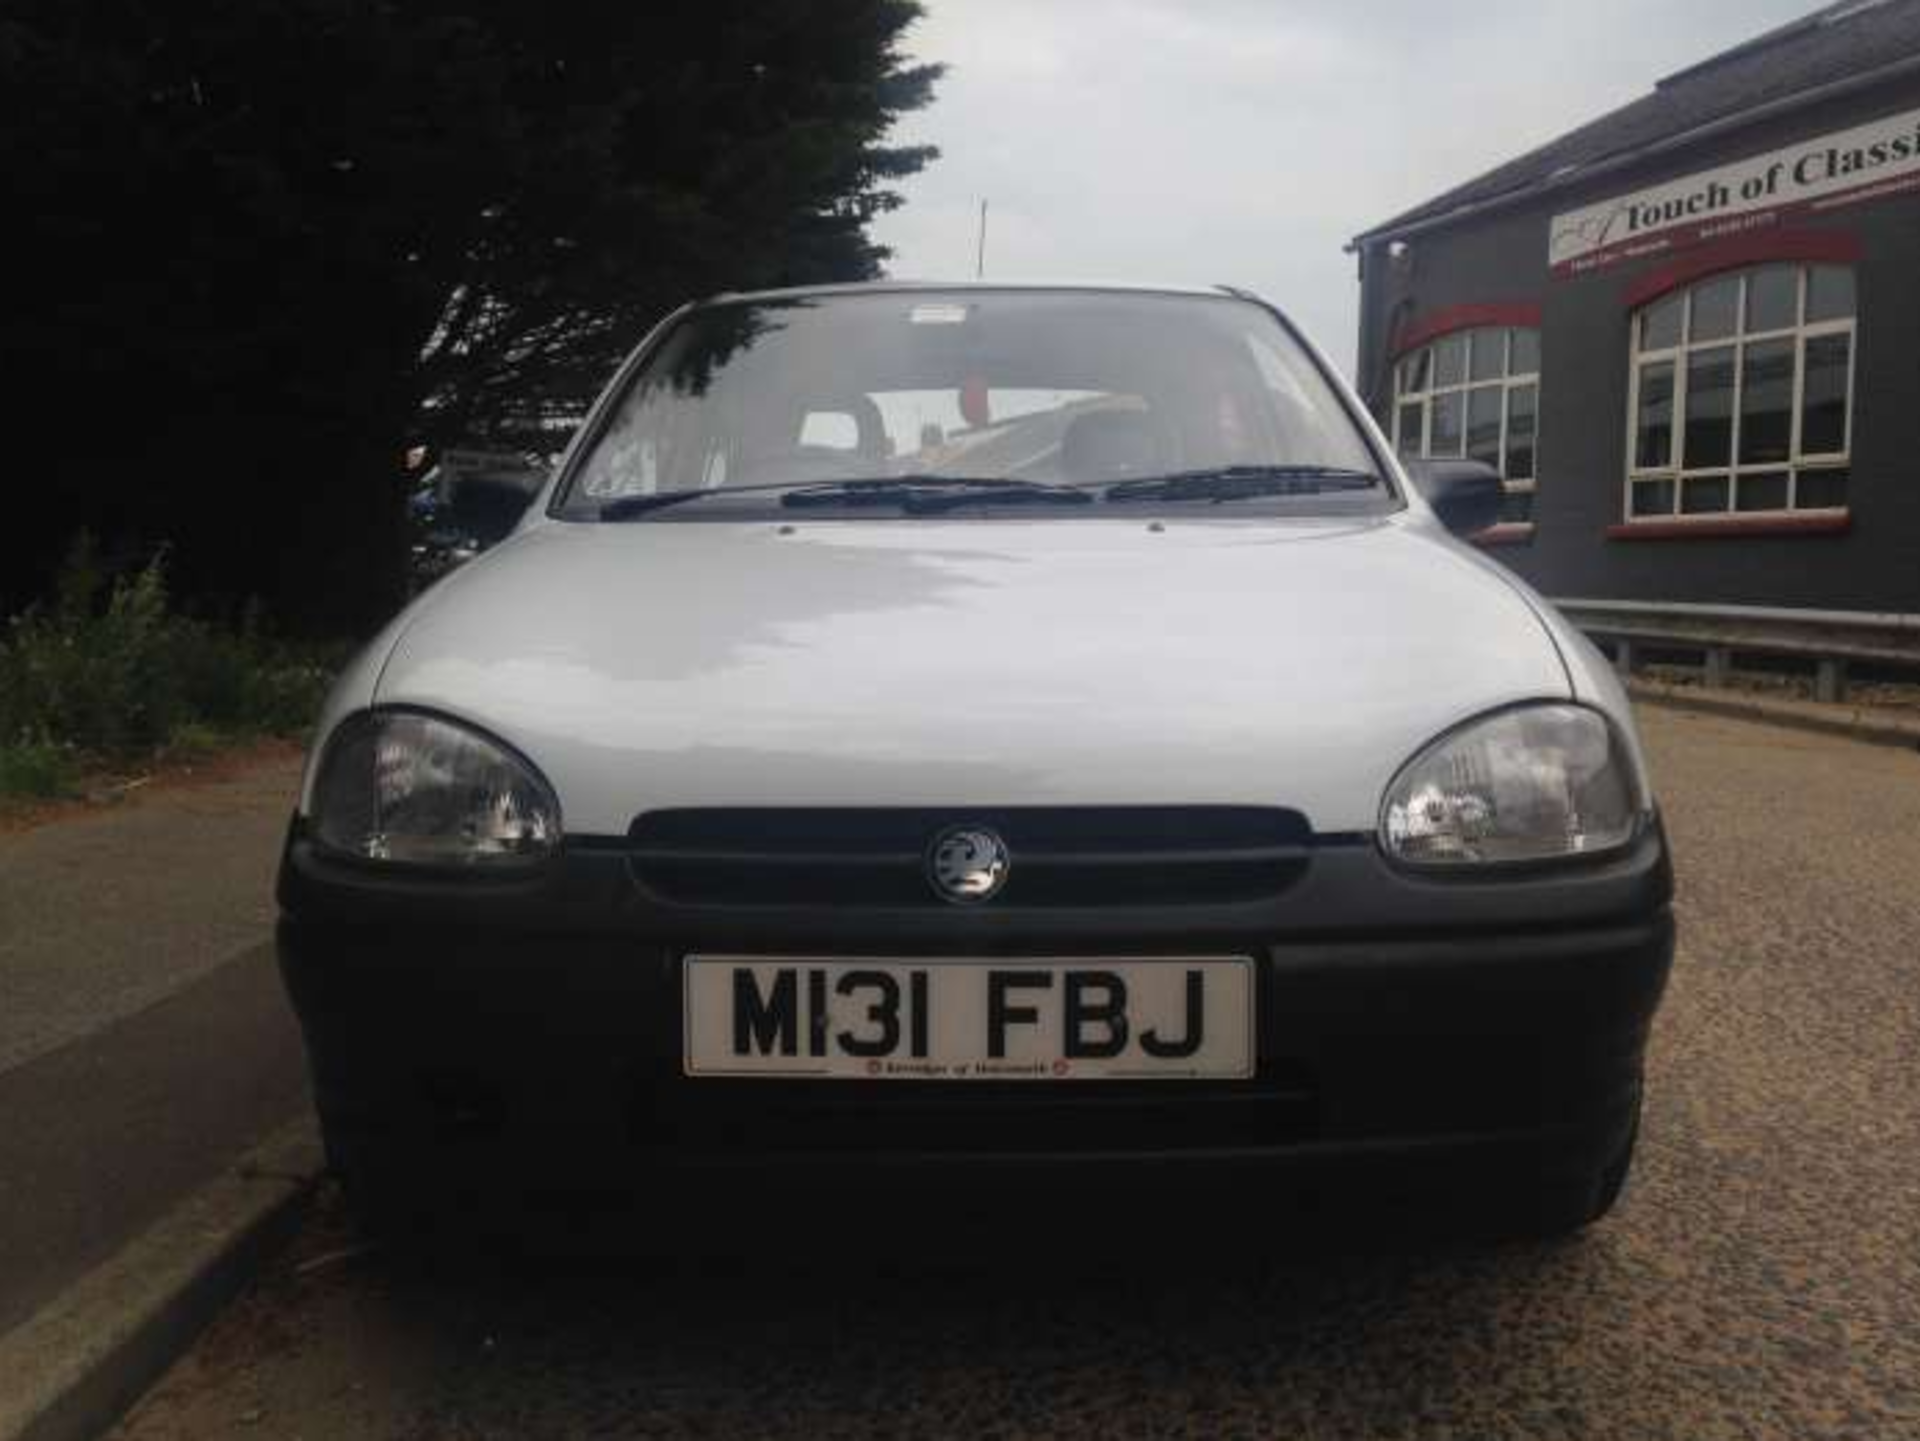 1995 Vauxhall Corsa, 1.4 Auto - 17'200 miles. One owner from new. - Image 4 of 14